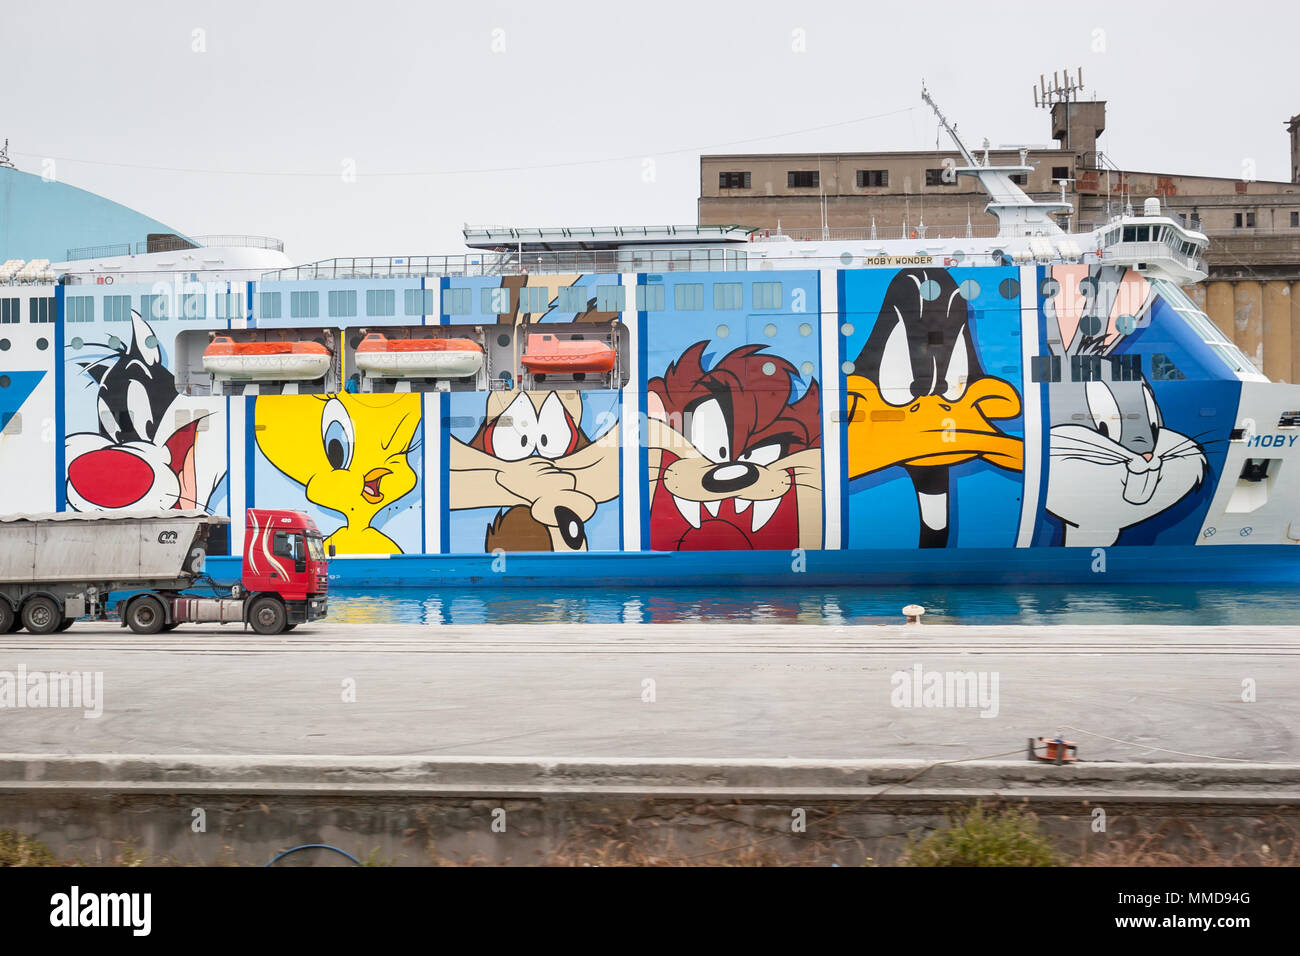 LA SPEZIA, ITALY : JUNE 15th, 2005 : Moby Lines Moby Wonder ferry ship with characters of Looney Tunes drawn at the side of the ship, docked in a port Stock Photo